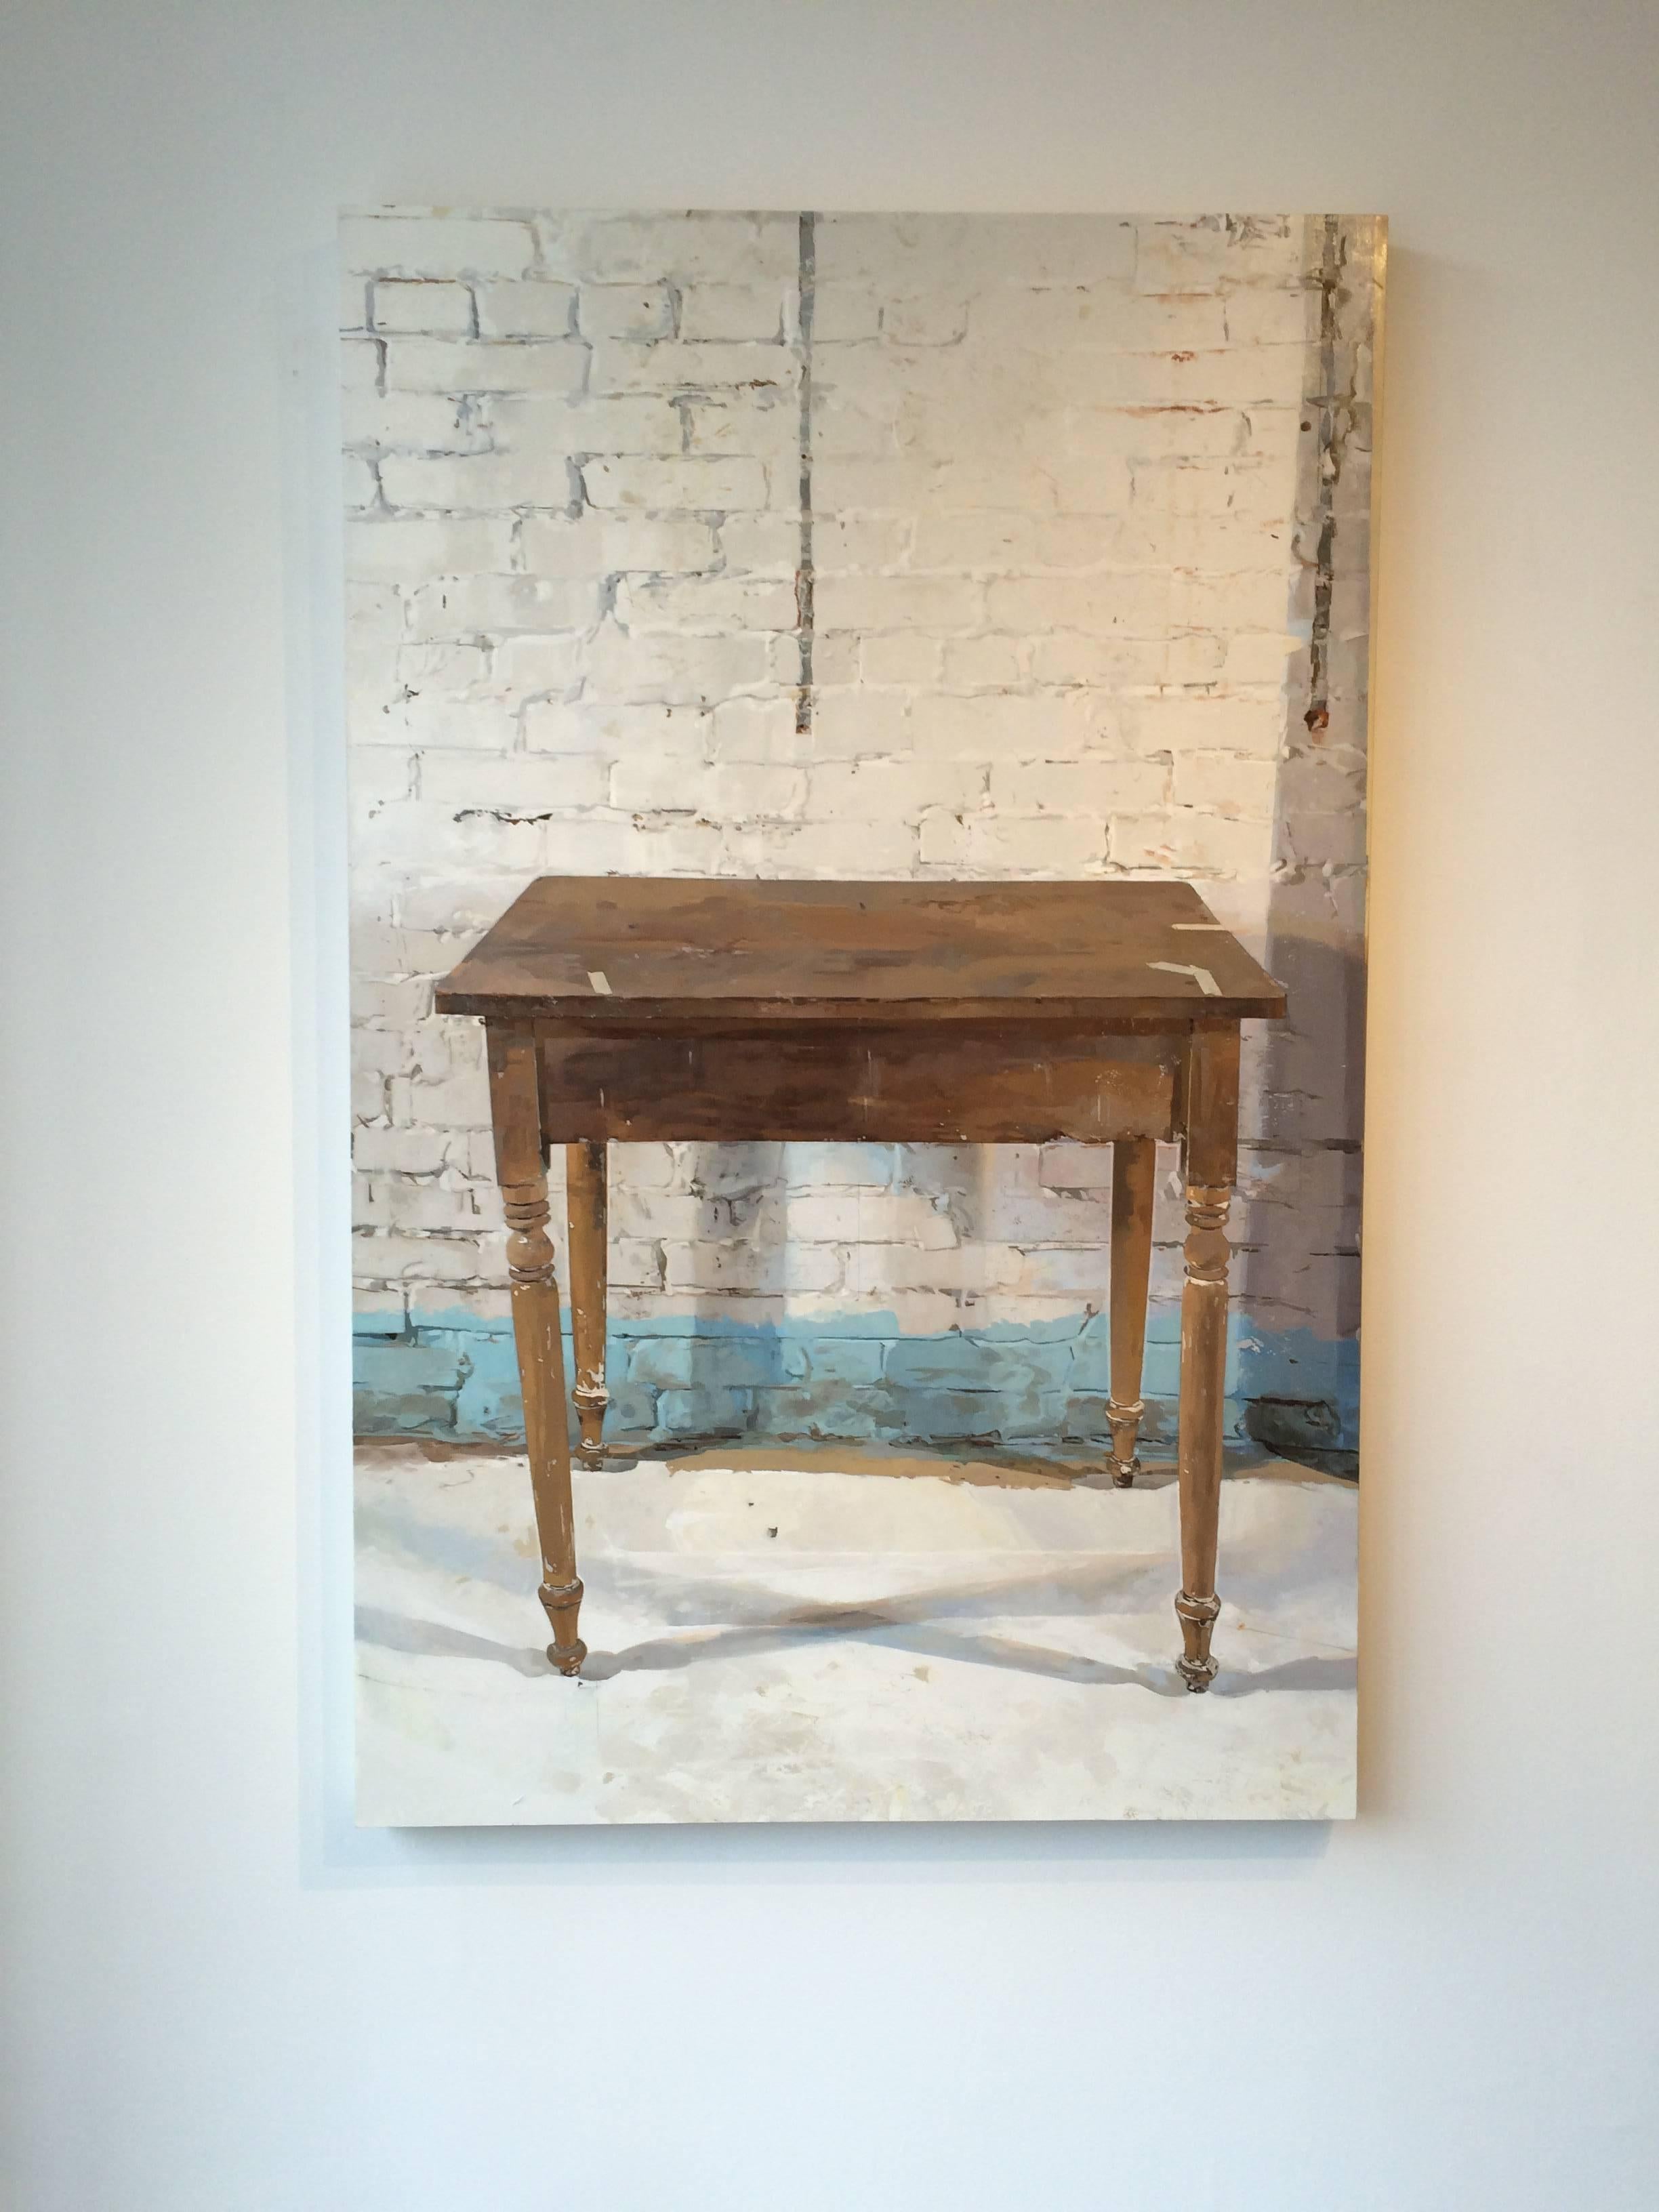 Jeffery's Table, Interior Still Life, Brown Wooden Table, White Brick Wall - Painting by Brett Eberhardt